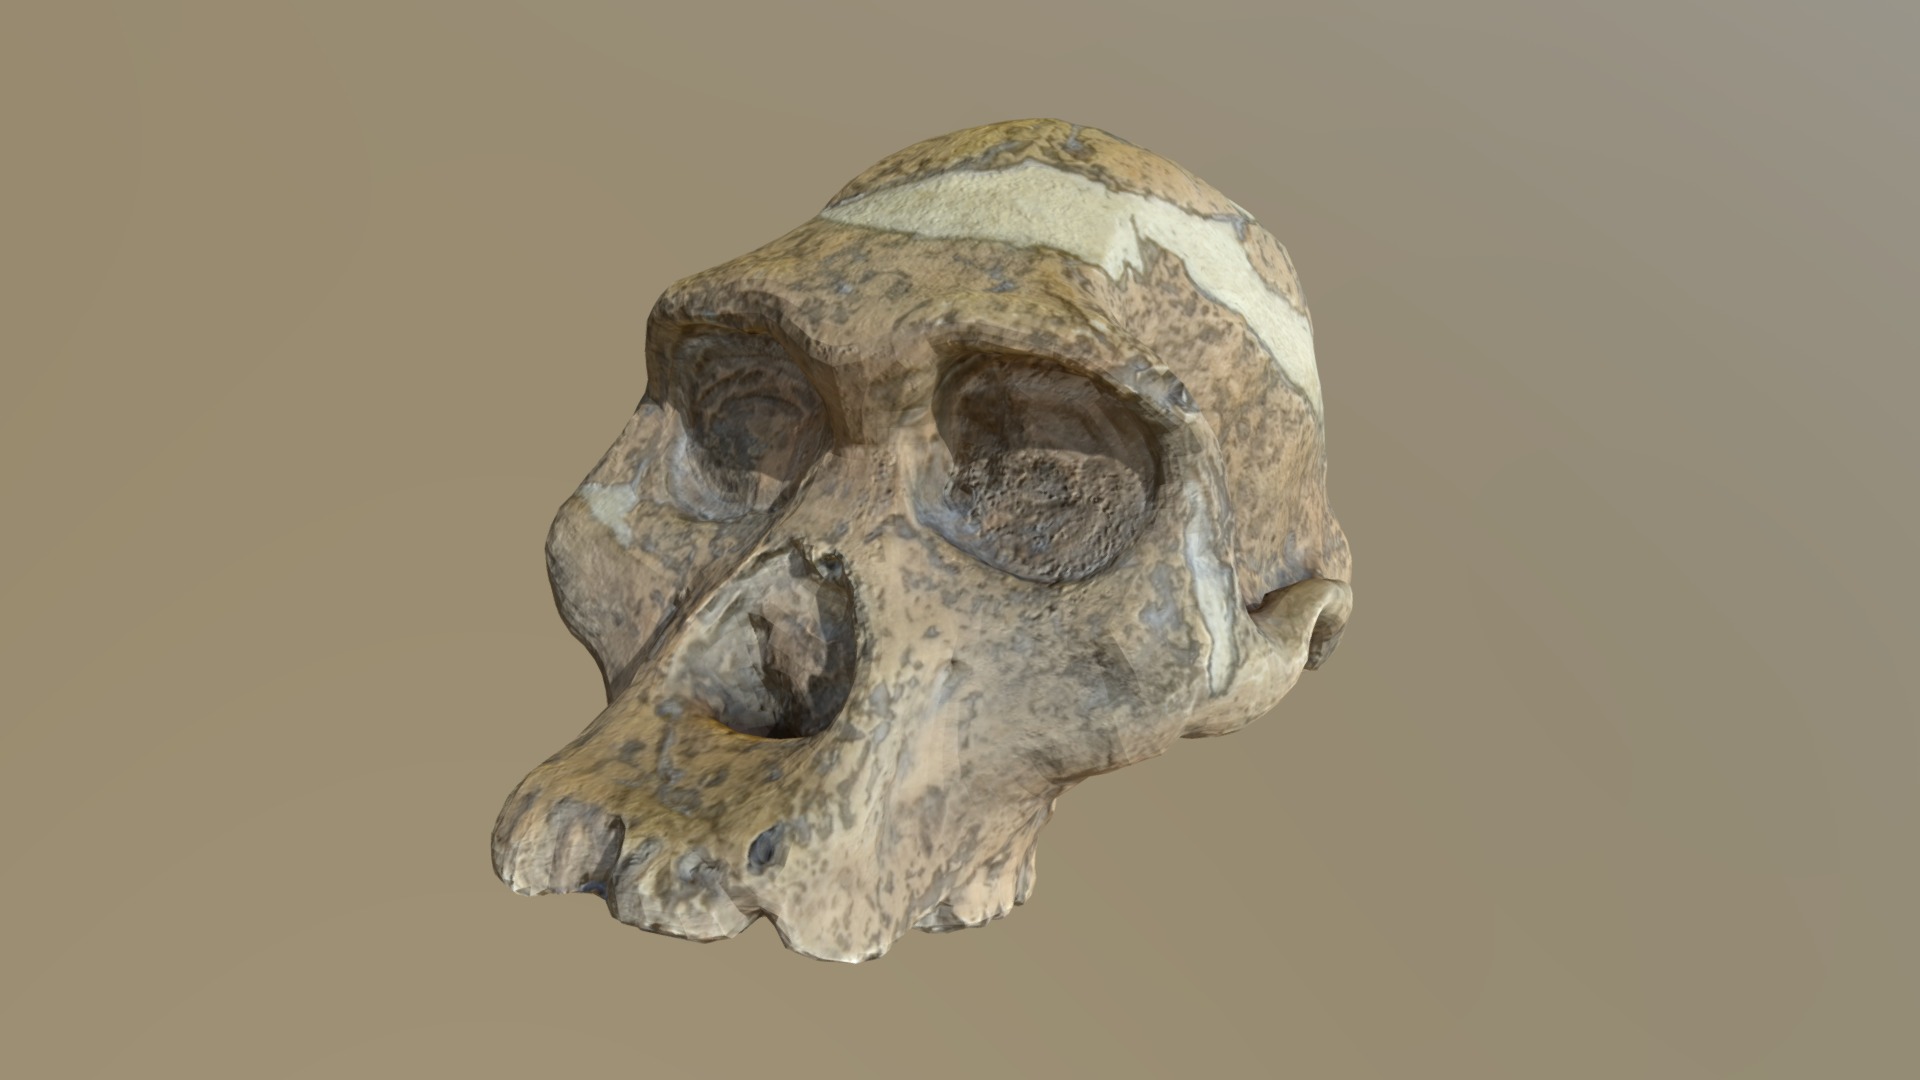 Scan of a molding of Mrs Ples’ skull, an Australopithecus Africanus discovered in 1947 in South Africa, and one of the most perfect pre-human skulls ever found.

https://en.wikipedia.org/wiki/Mrs._Ples

A little bit more than 100 pictures were used for this scan - Australopithecus Africanus' skull (Mrs. Ples) - 3D model by Antoine Dresen (@adresen) 3d model